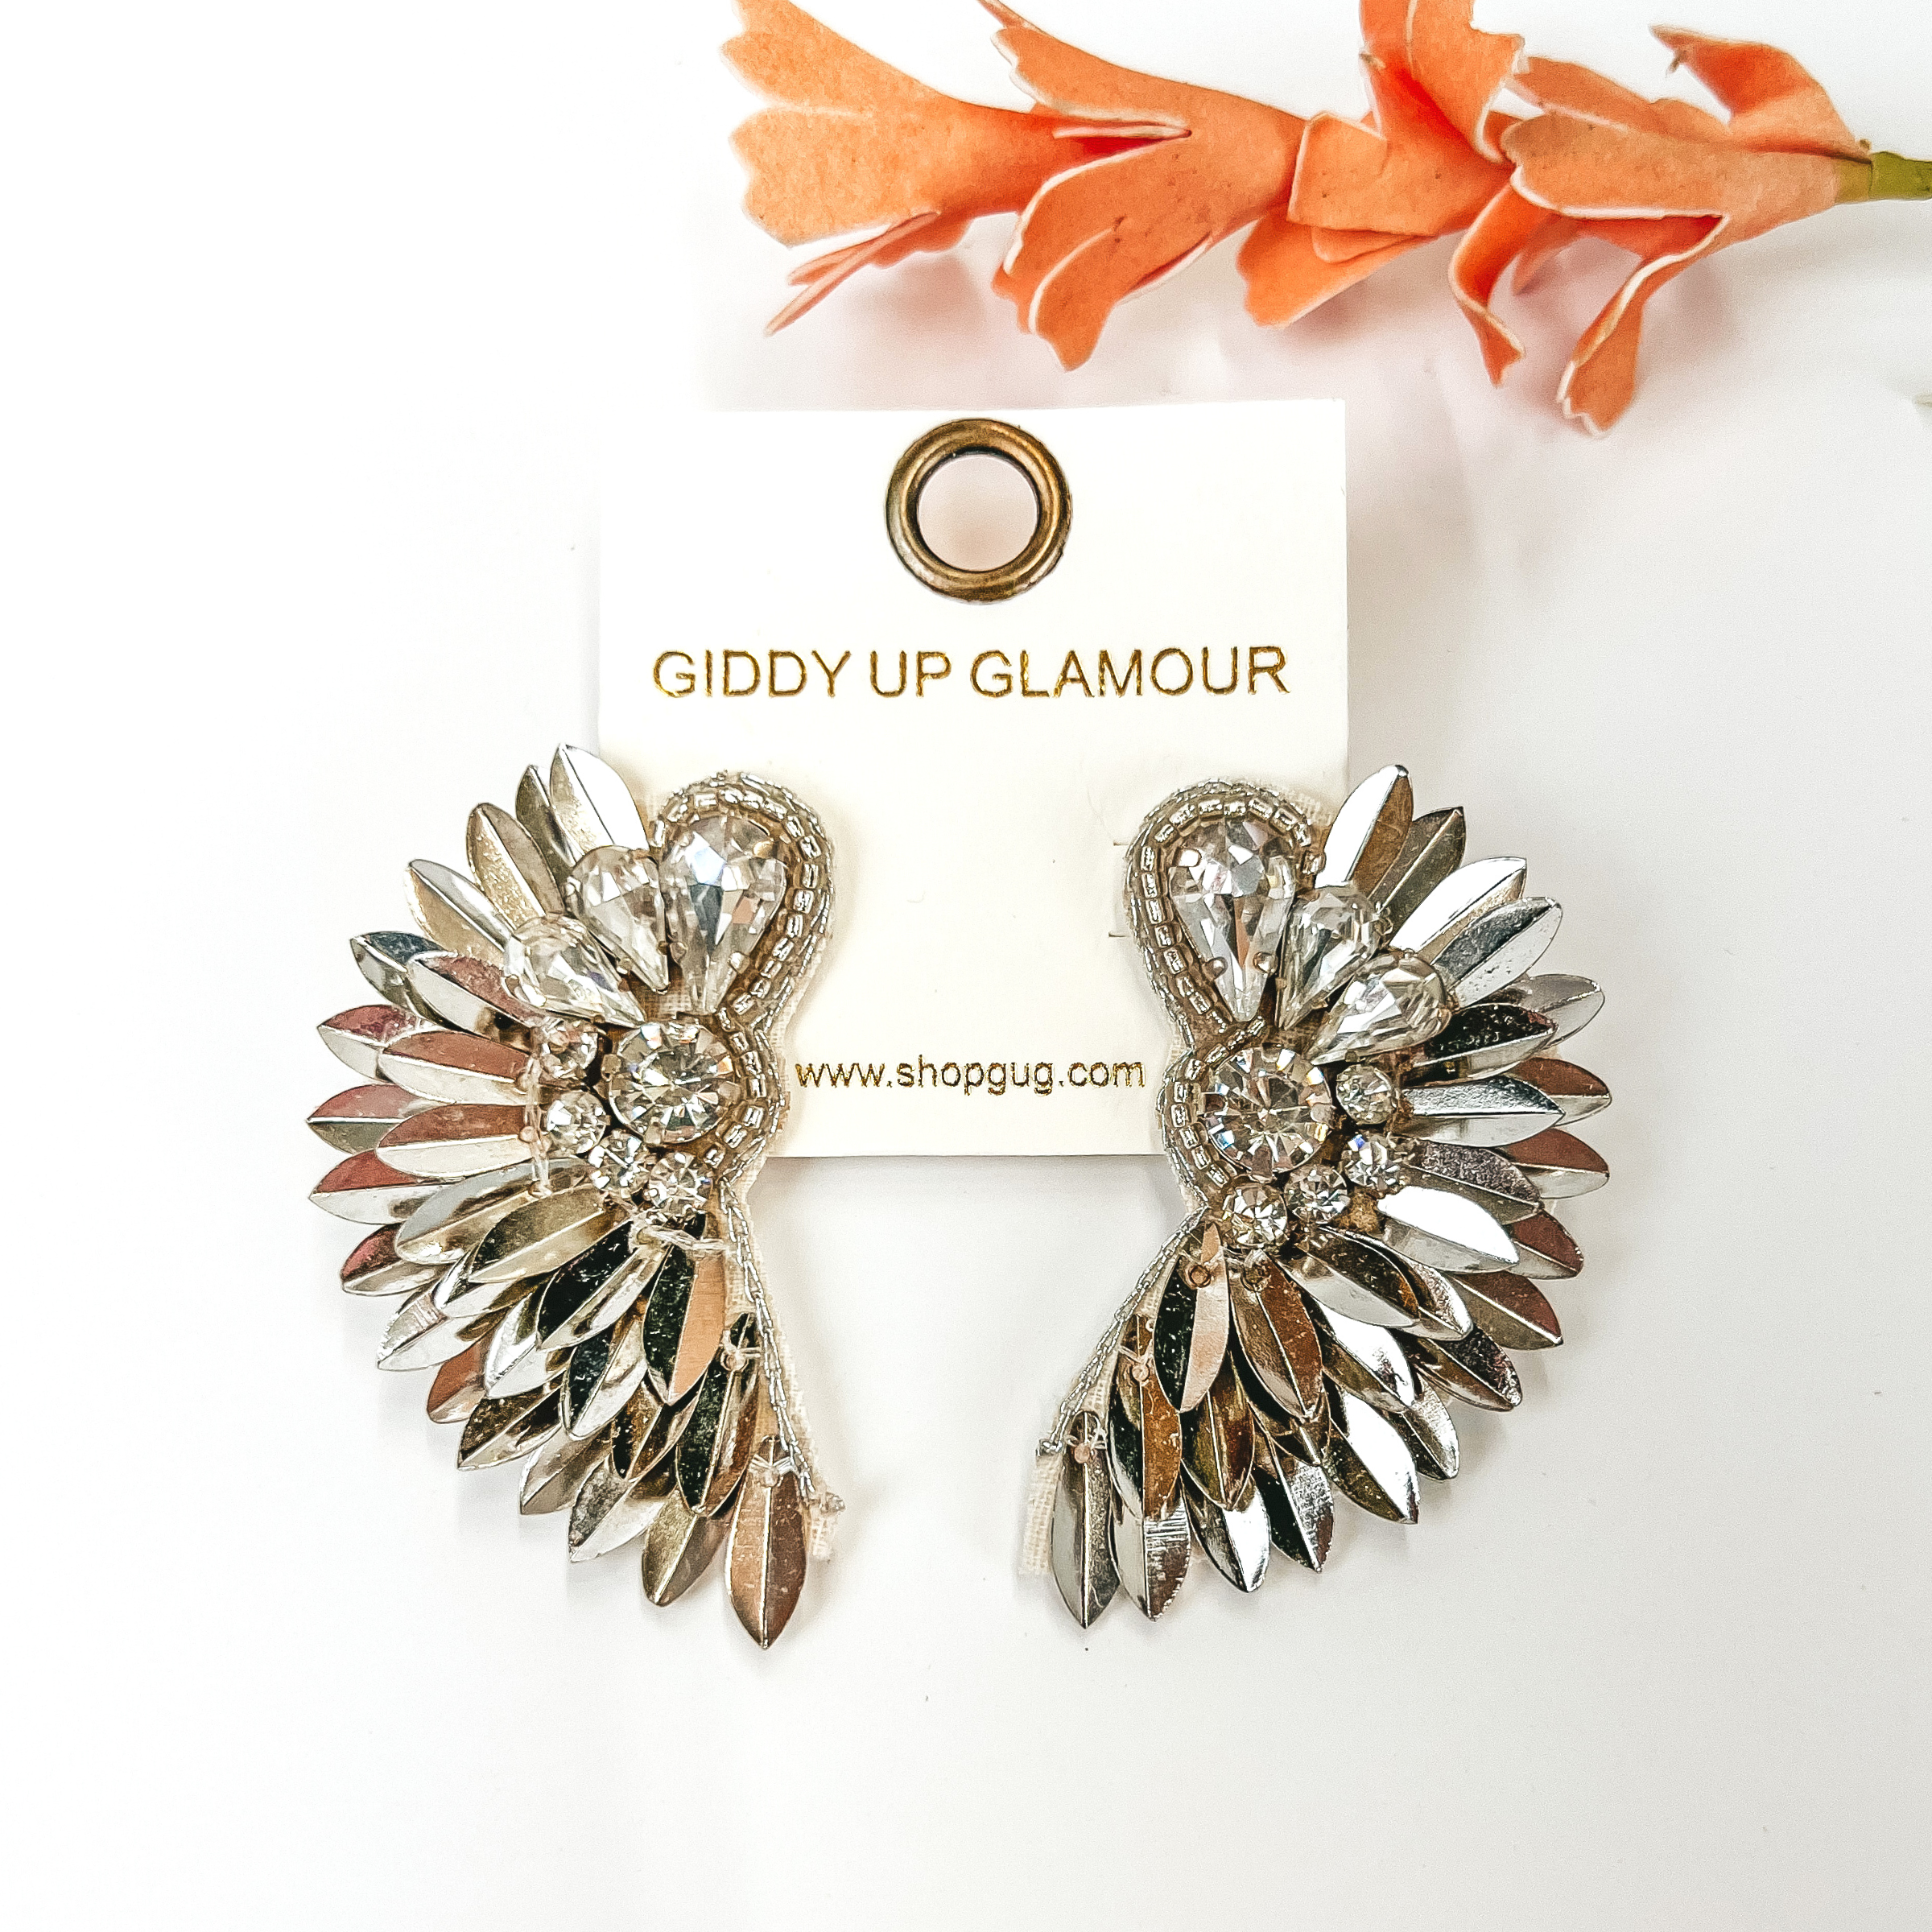 Silver, sequin feather earrings with a clear crystal design. These earrings are pictured on a white background with an orange flower above the earrings. 